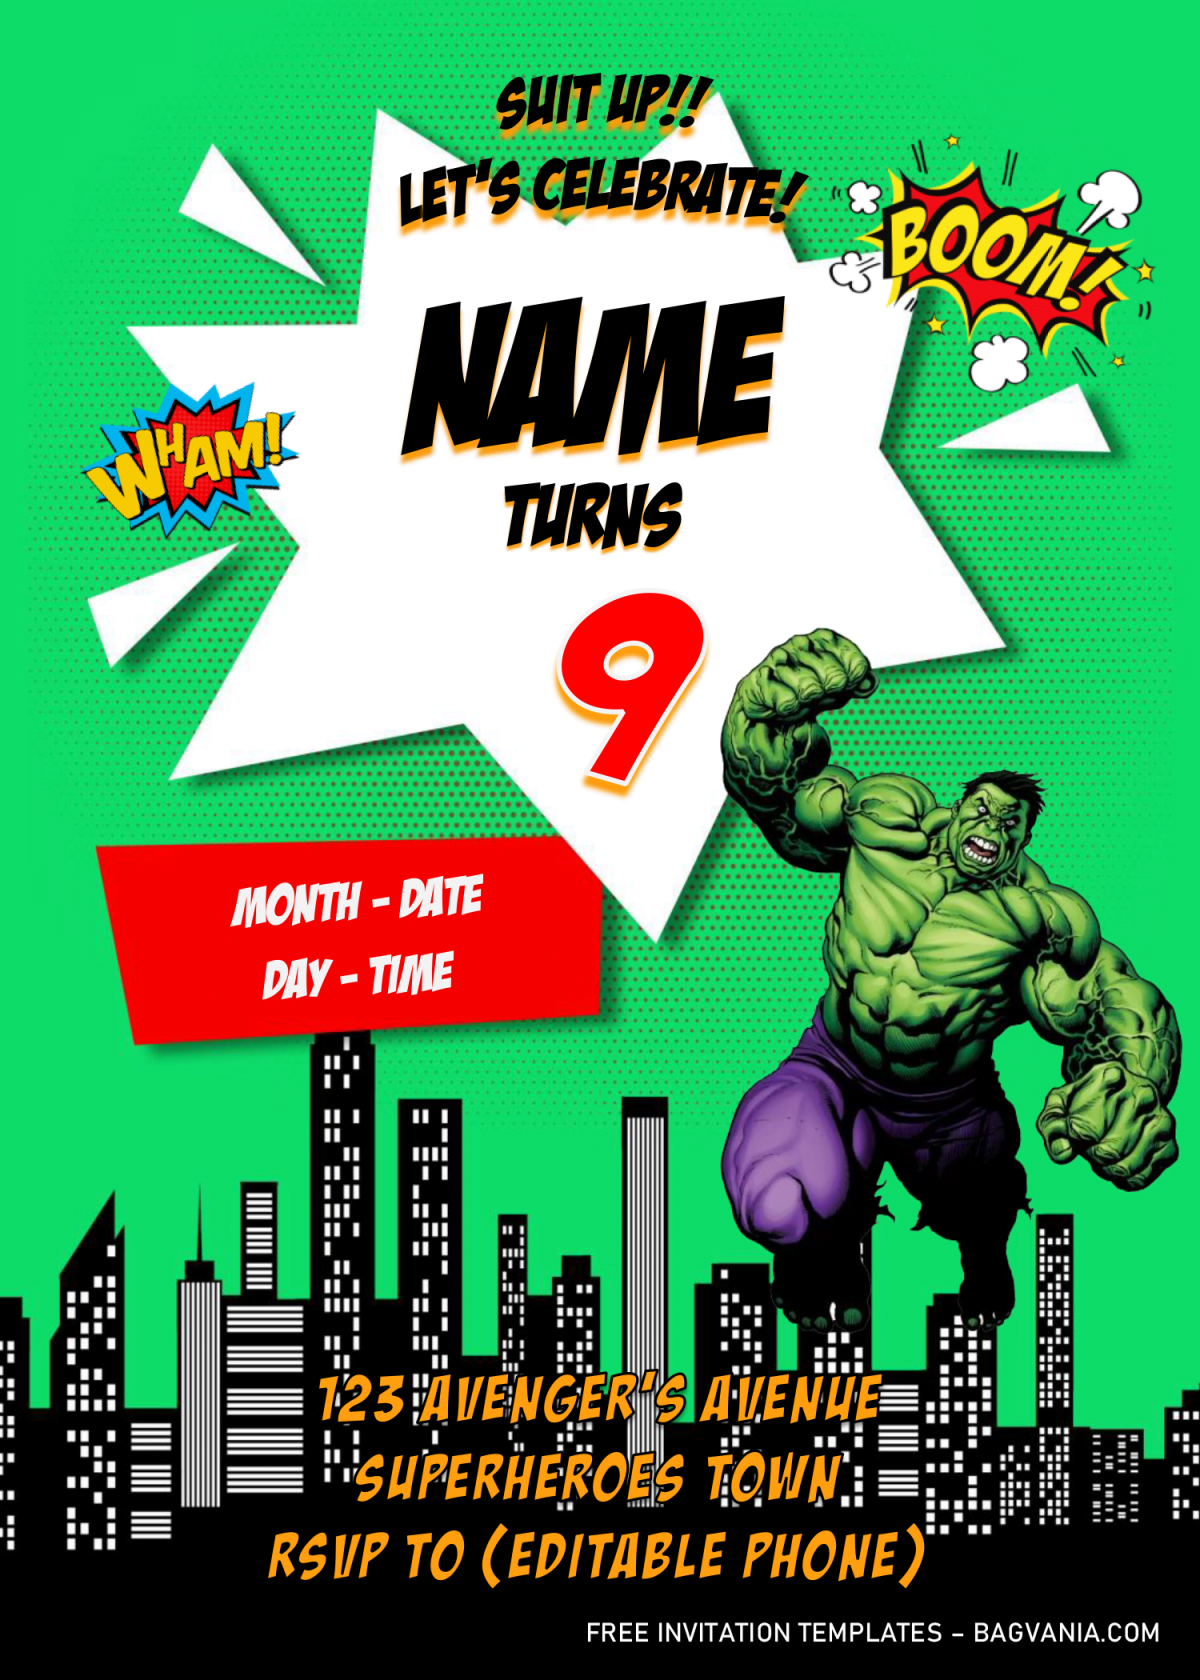 Avengers Birthday Party Invitation Templates - Editable With MS Word and has hulk